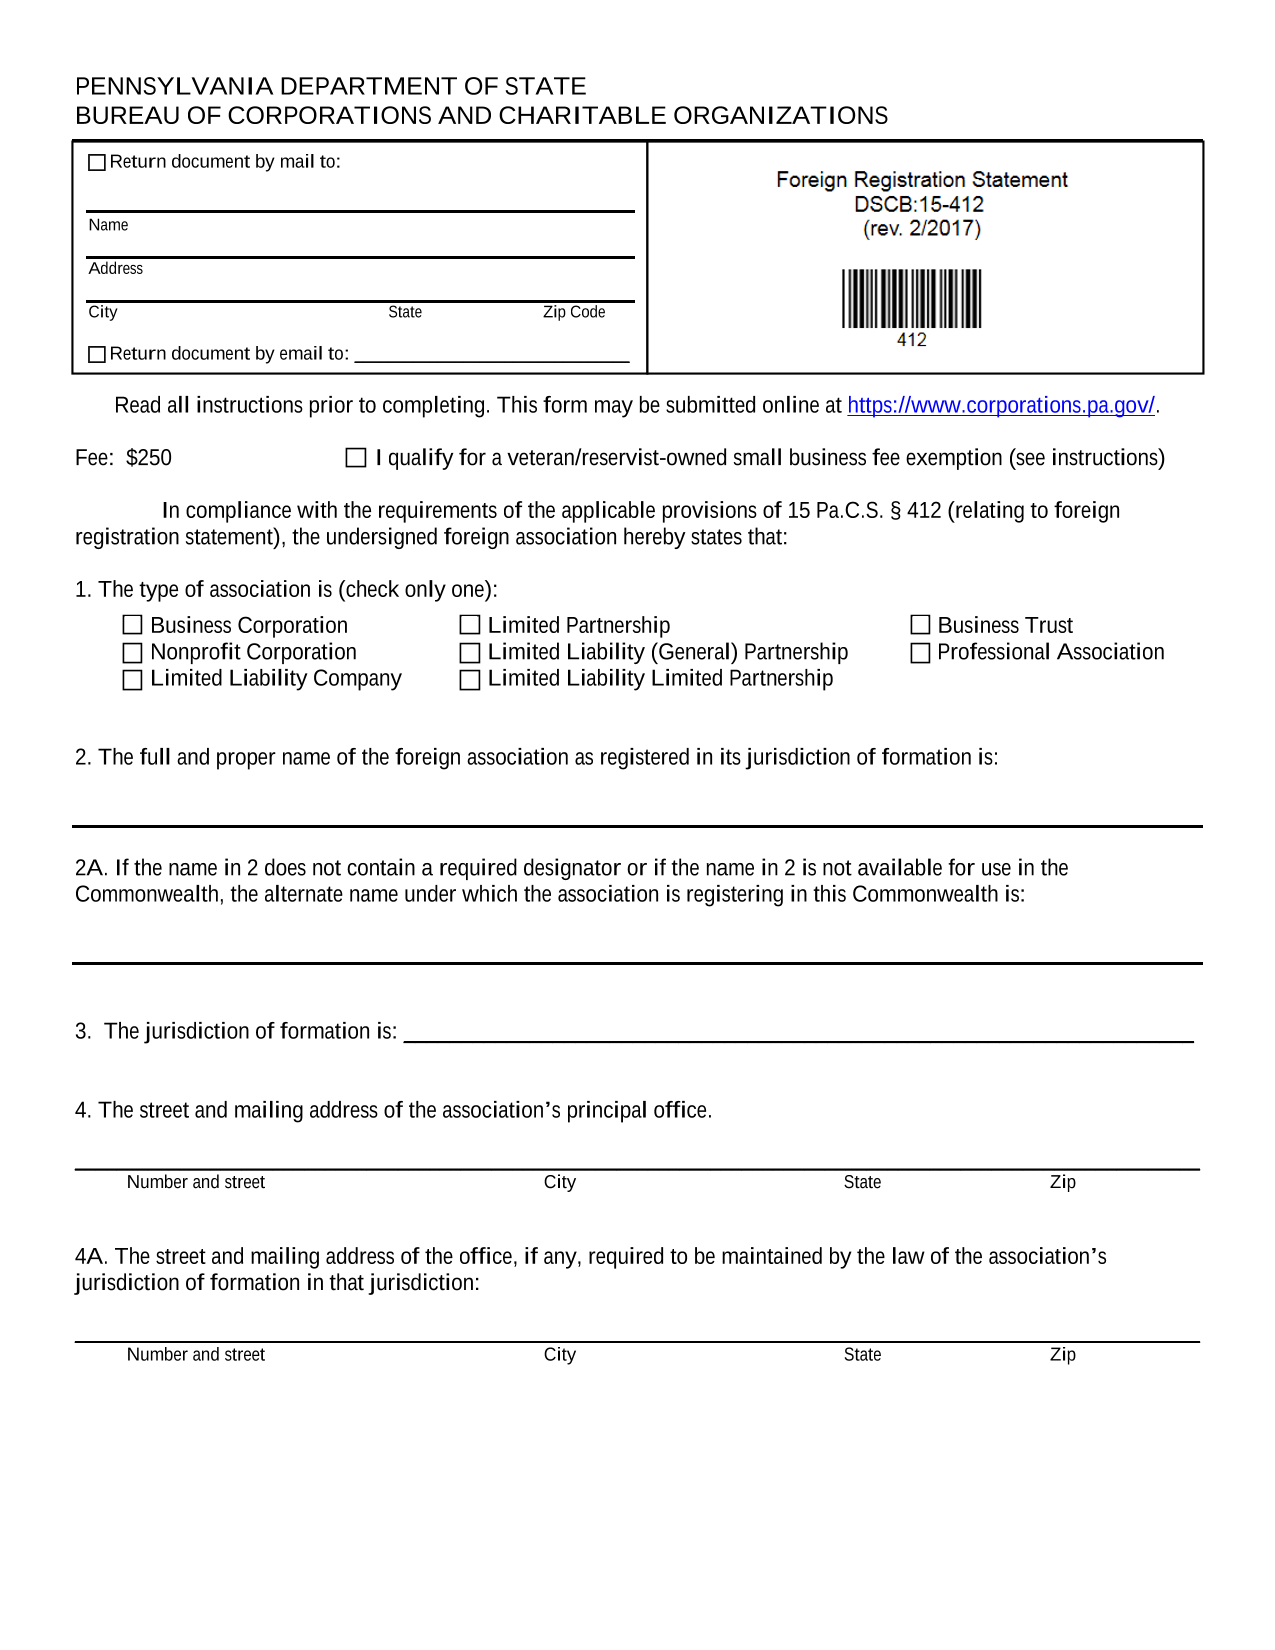 pennsylvania-foreign-nonprofit-application-for-certificate-of-authority